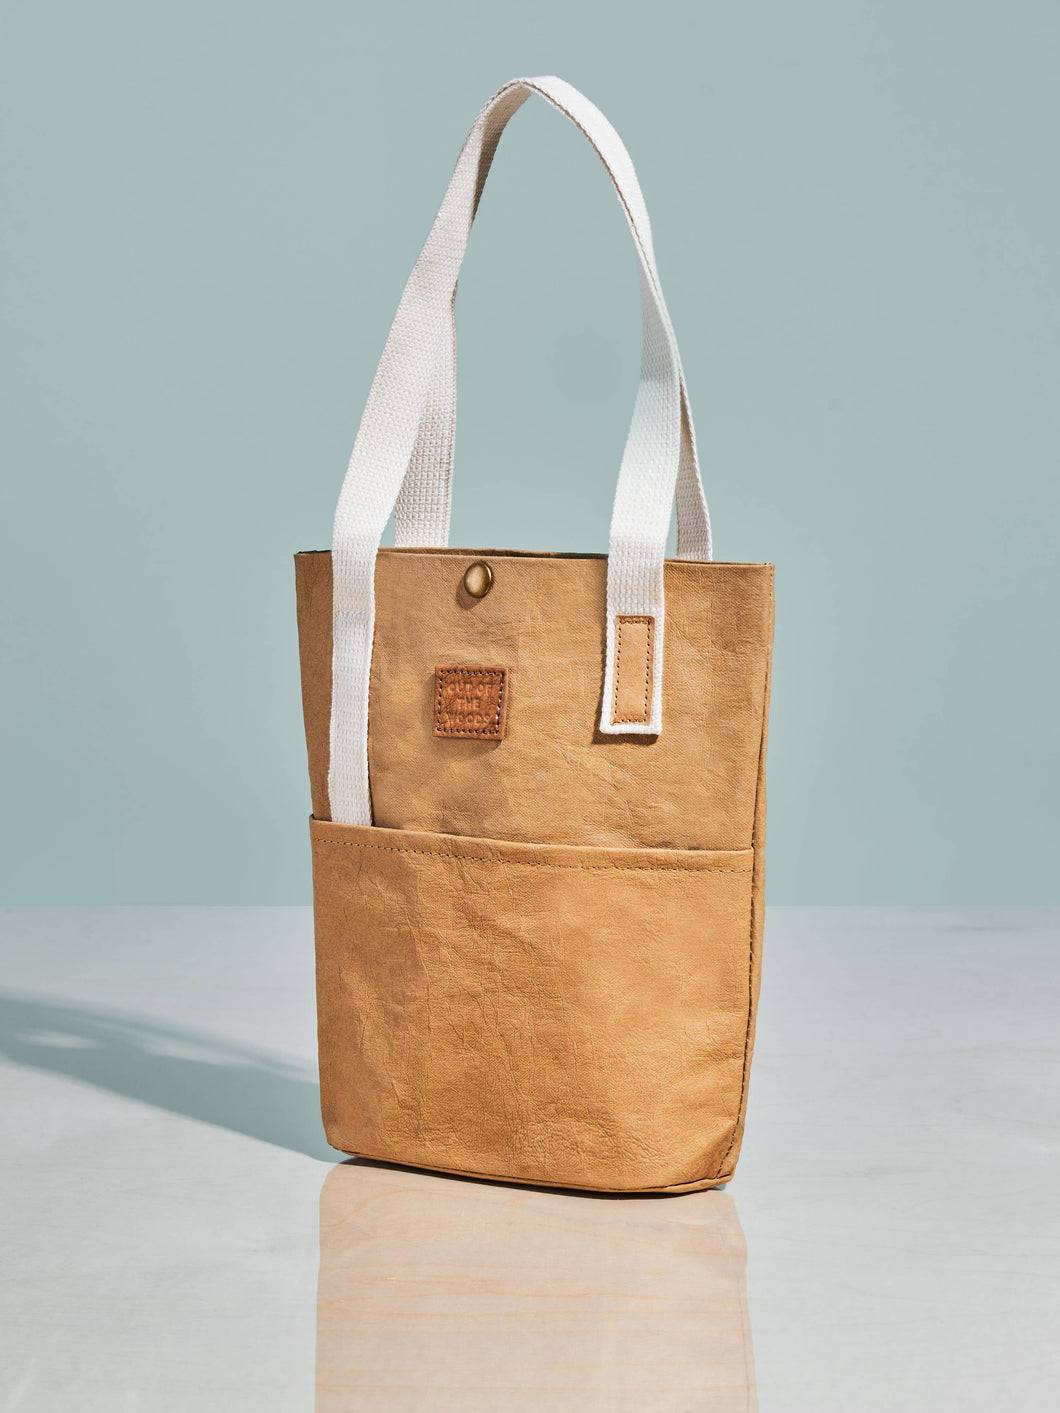 Rabbit Pure Tote - SMALL CASE PACKS